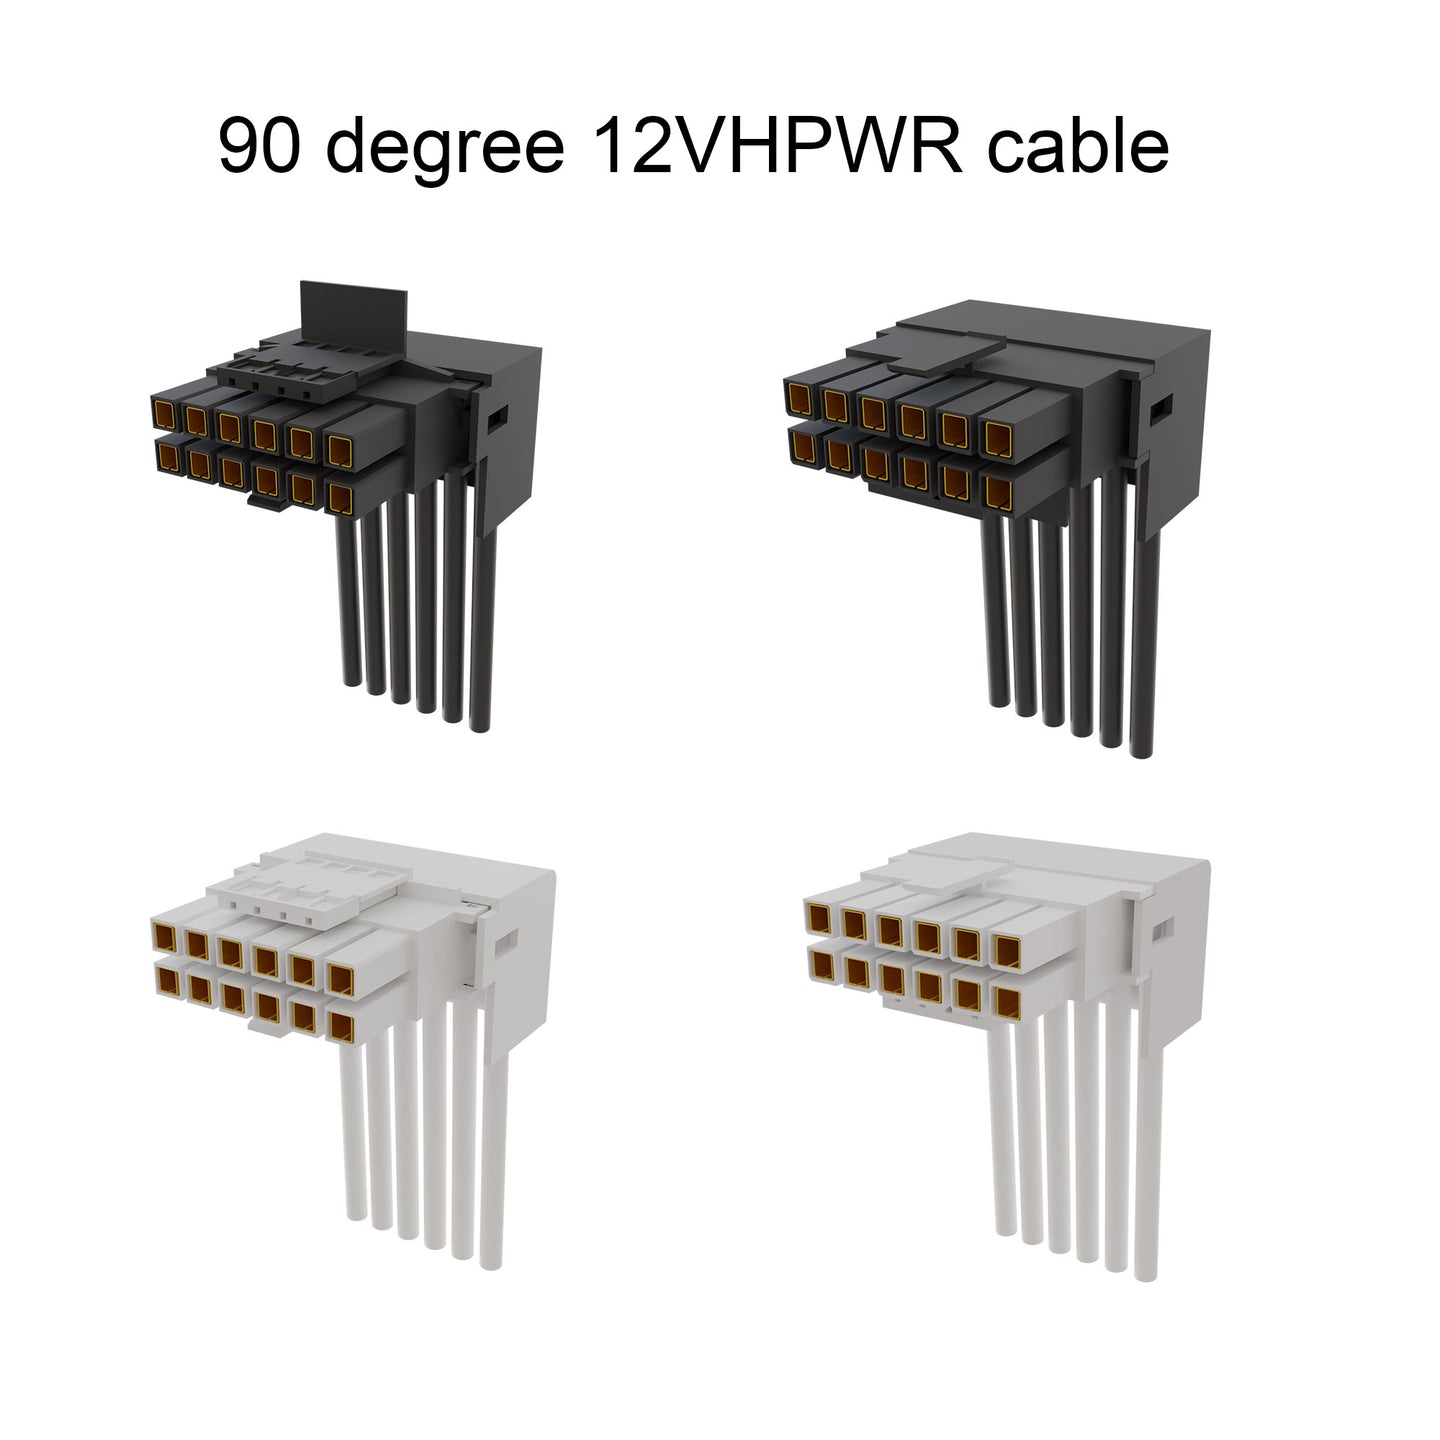 dreambigbyray 90 degreed 12VHPWR 12+4p cable 4090 4080 16pin power cable